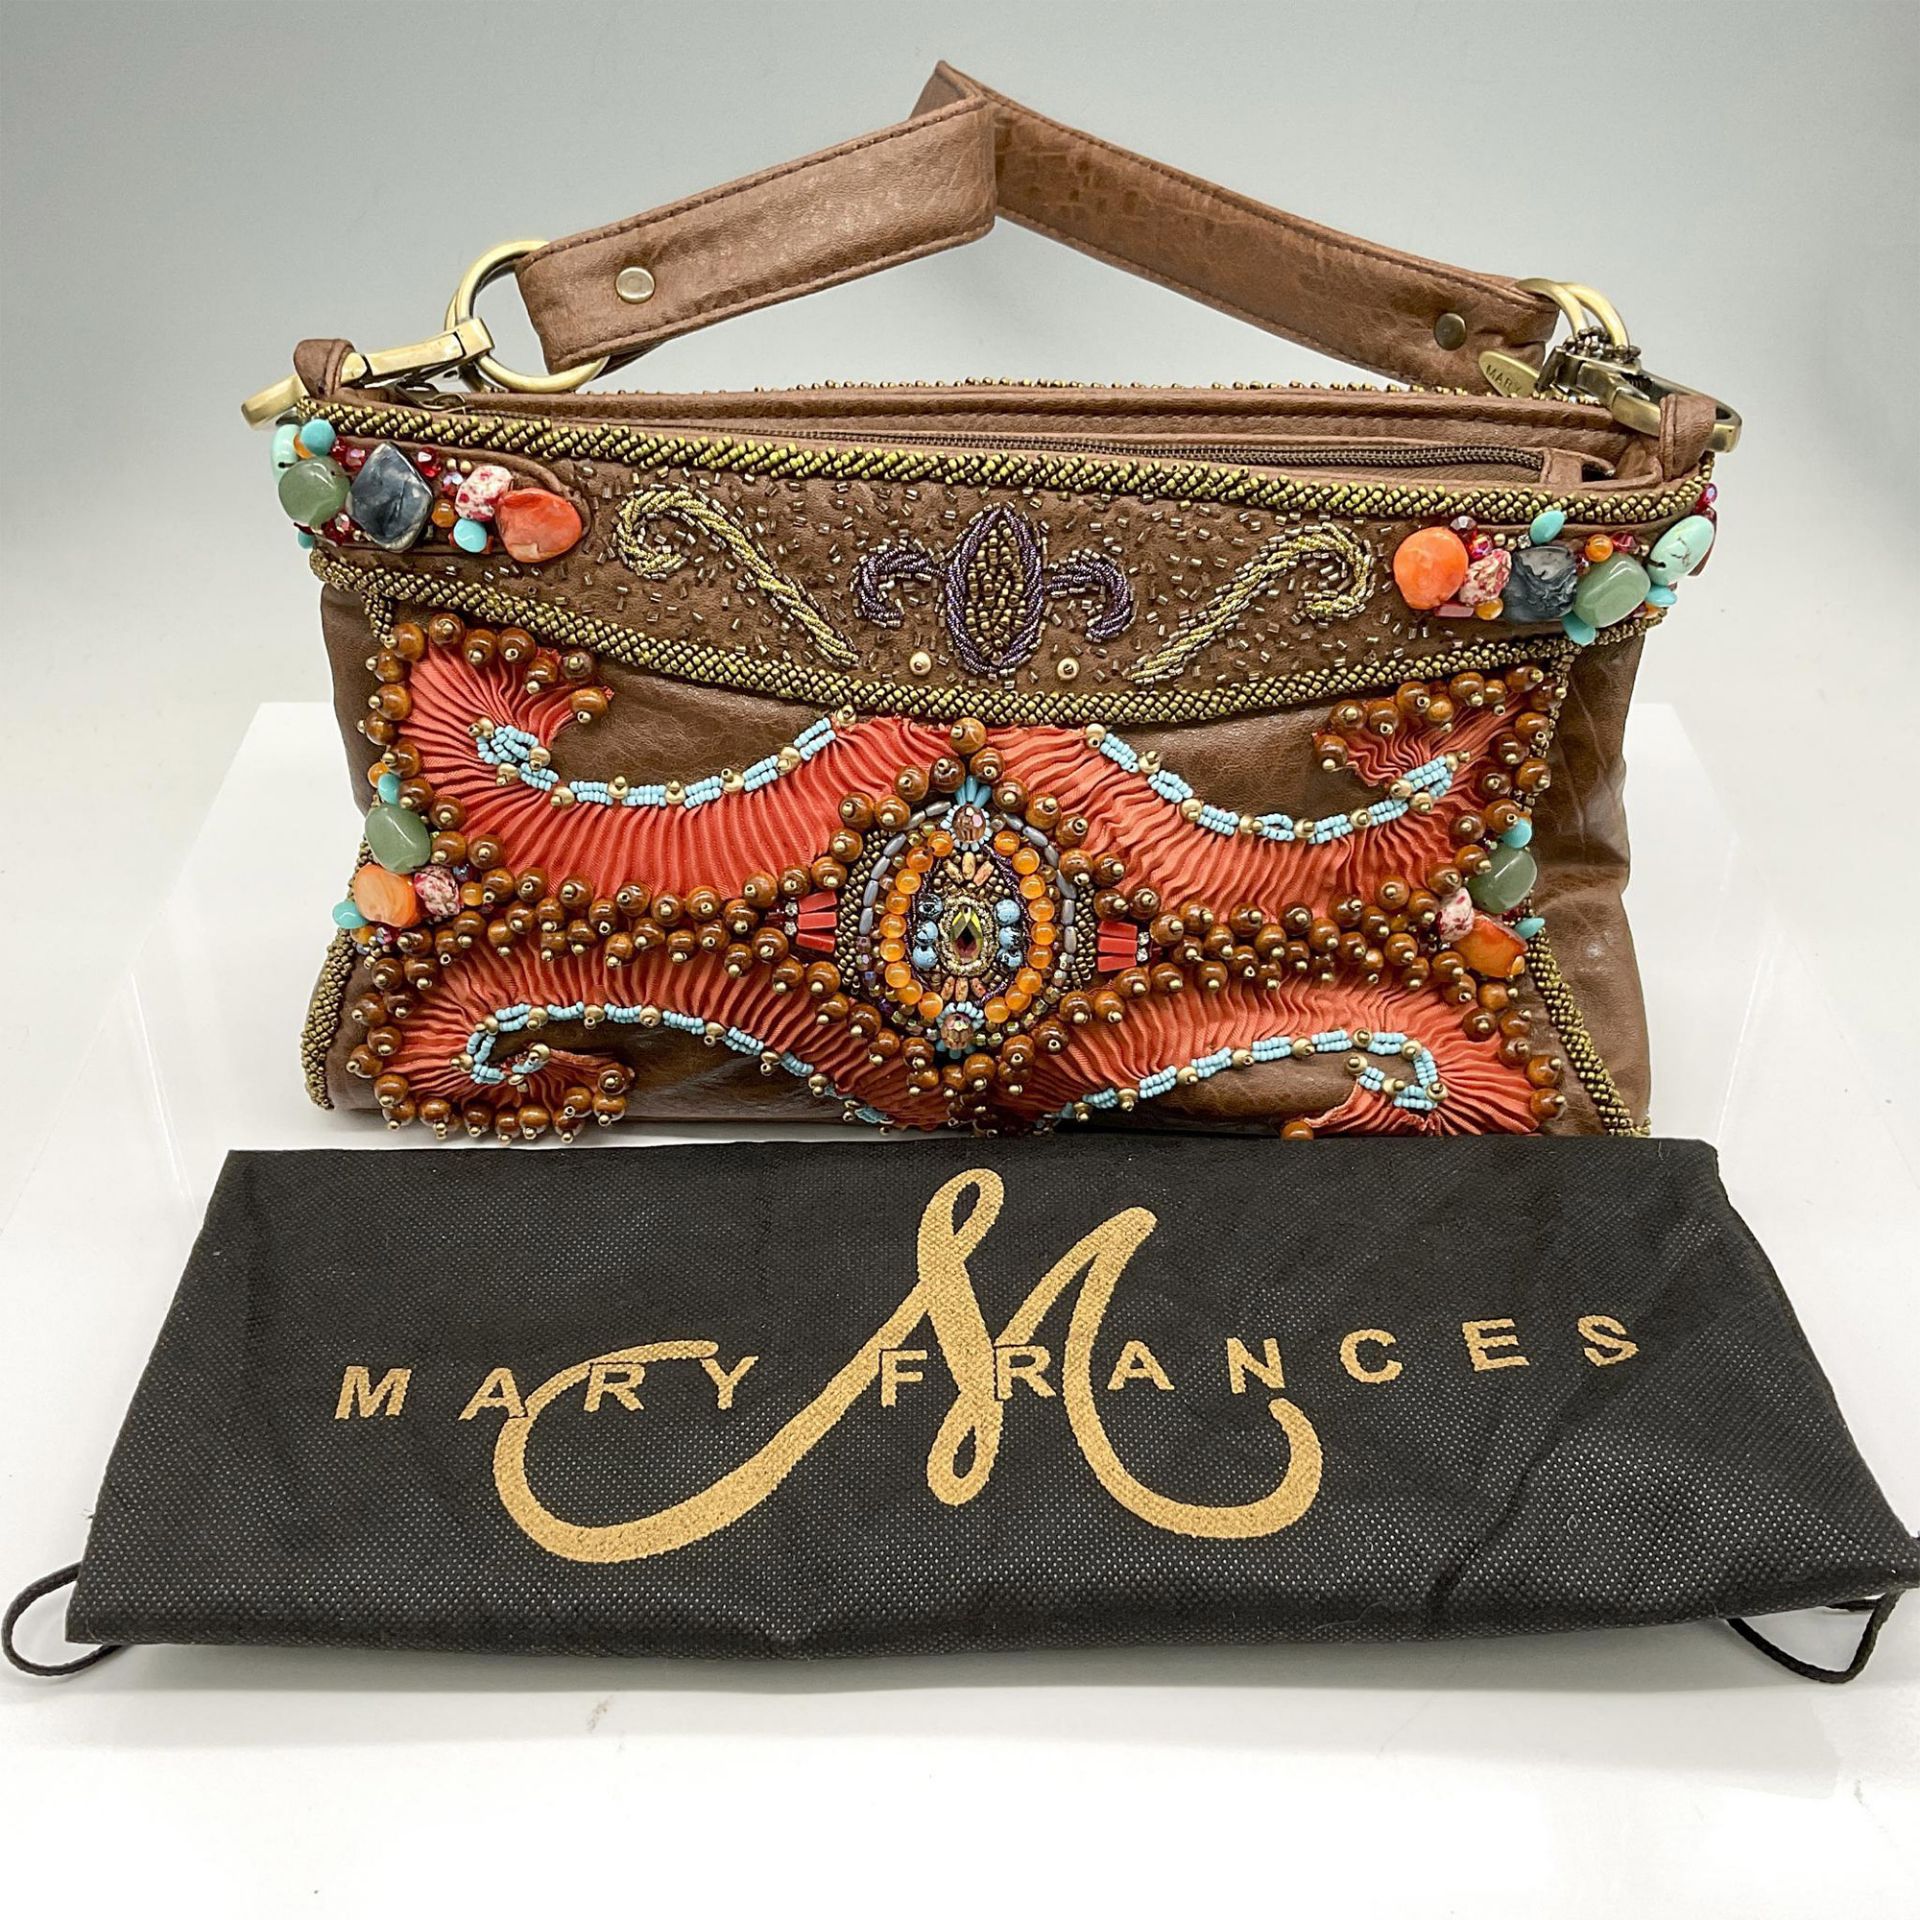 Mary Frances Hand Bag, Indian Summer - Image 4 of 4